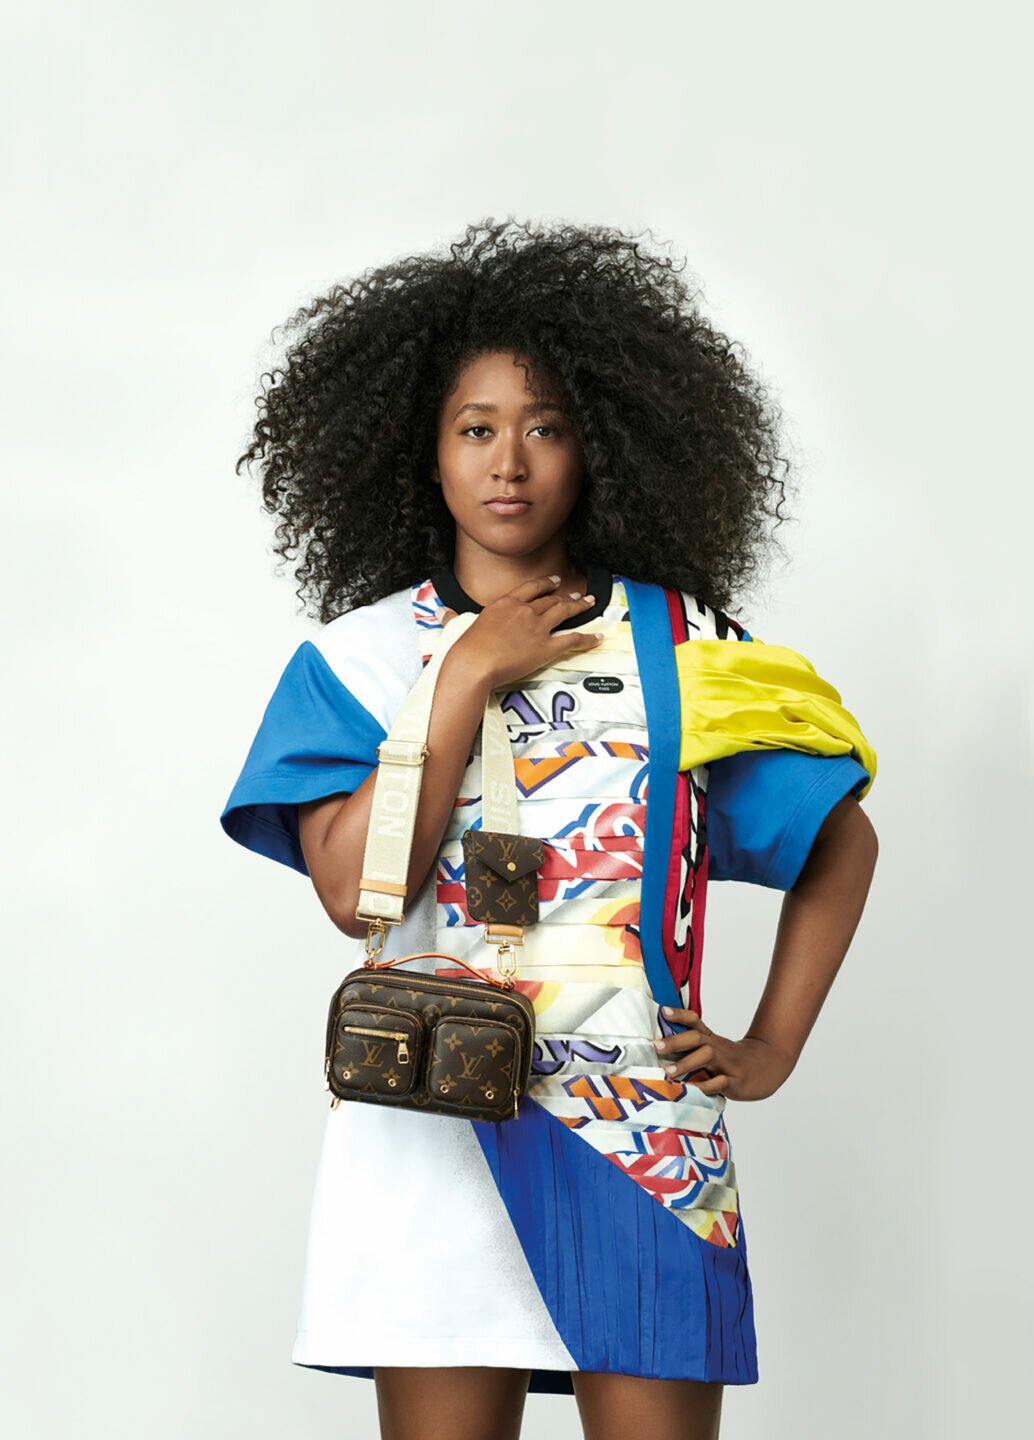 Tennis Champ Naomi Osaka Is Fashion’s New Darling And Here’s Why